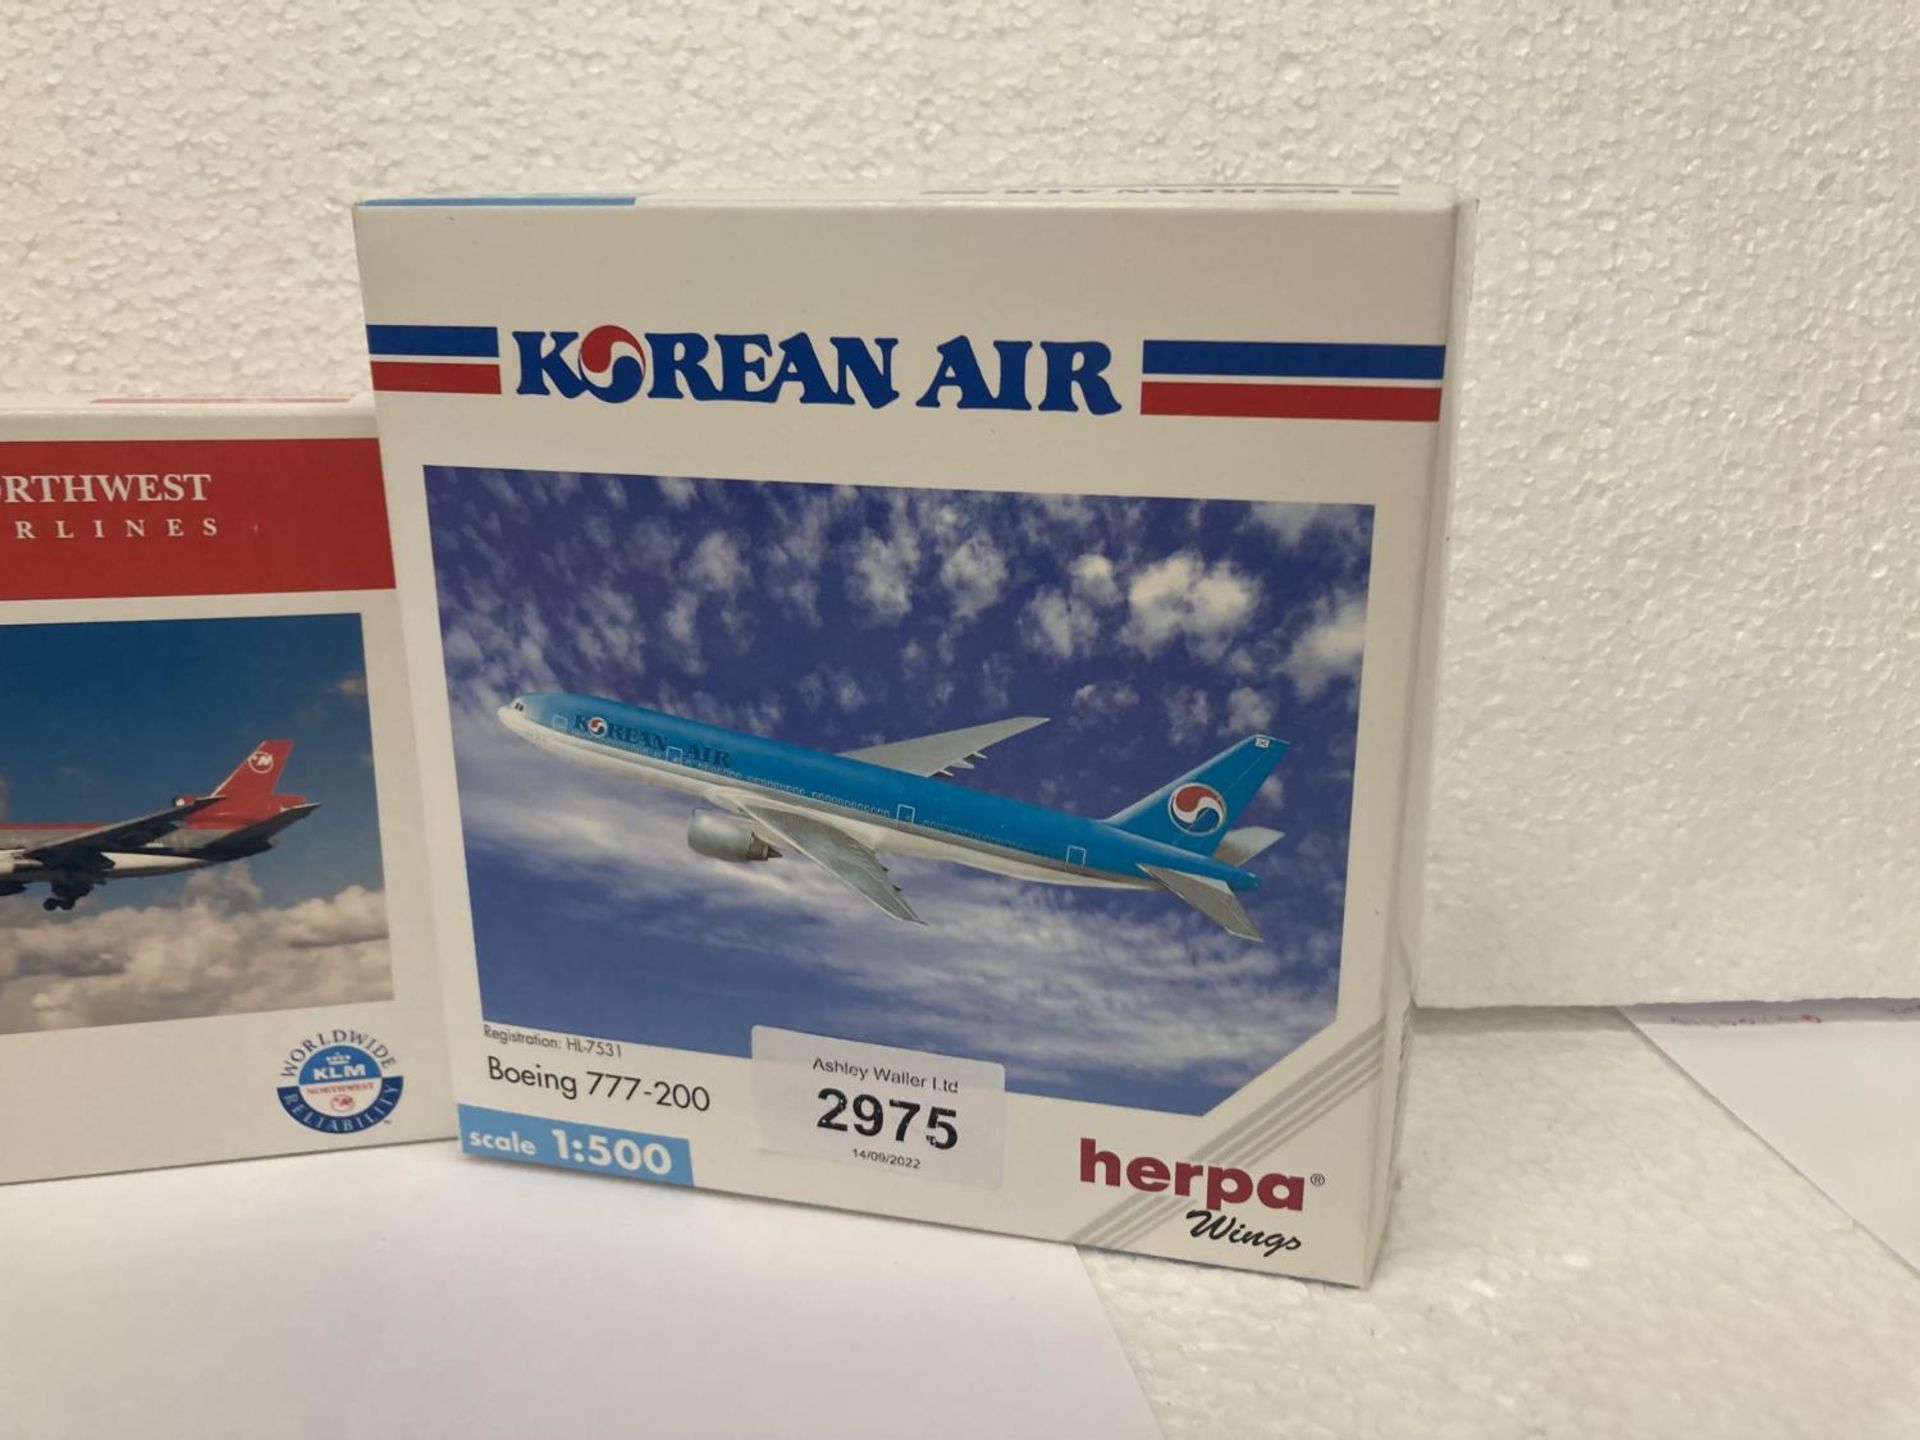 FOUR HERPA WINGS COLLECTION PLANES TO INCLUDE - KOREAN AIR BOEING 777-200 NO. 506458, NORTHWEST - Image 4 of 7